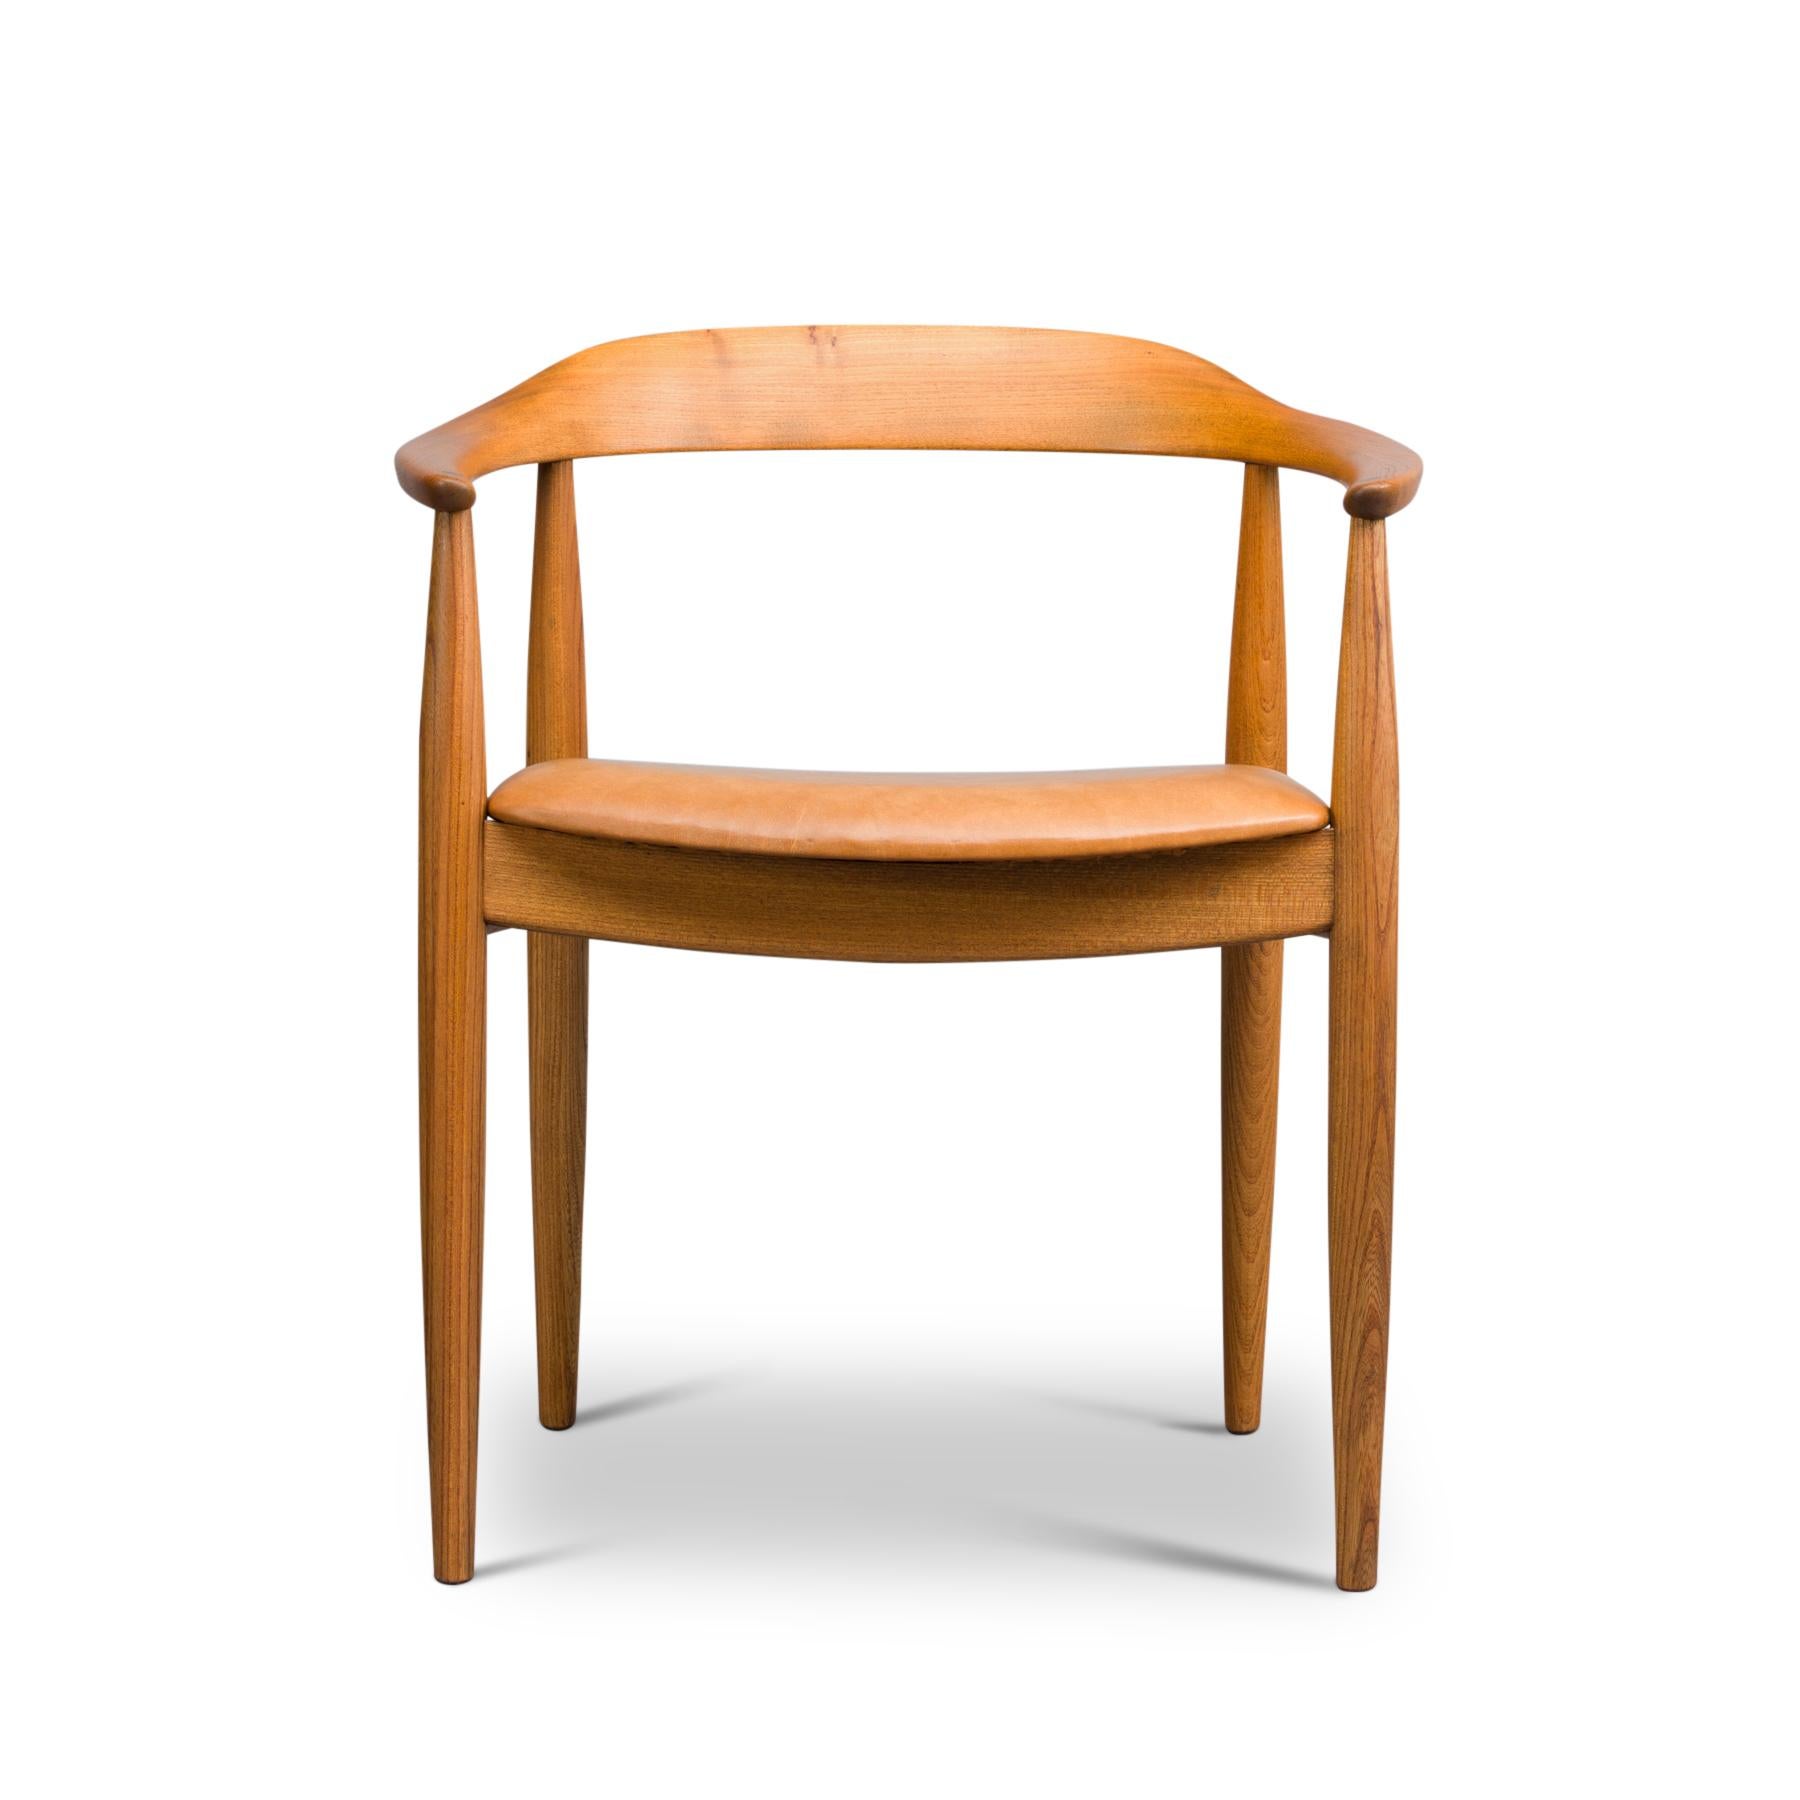 Designed by Illum Wikkelsø this chair is instantaneously recognizable as an Niels Eilersen. Producer Eilersen was proficient in steam bending of wood and made the back of the chair and armrests in one piece. This chair is also referred to as round